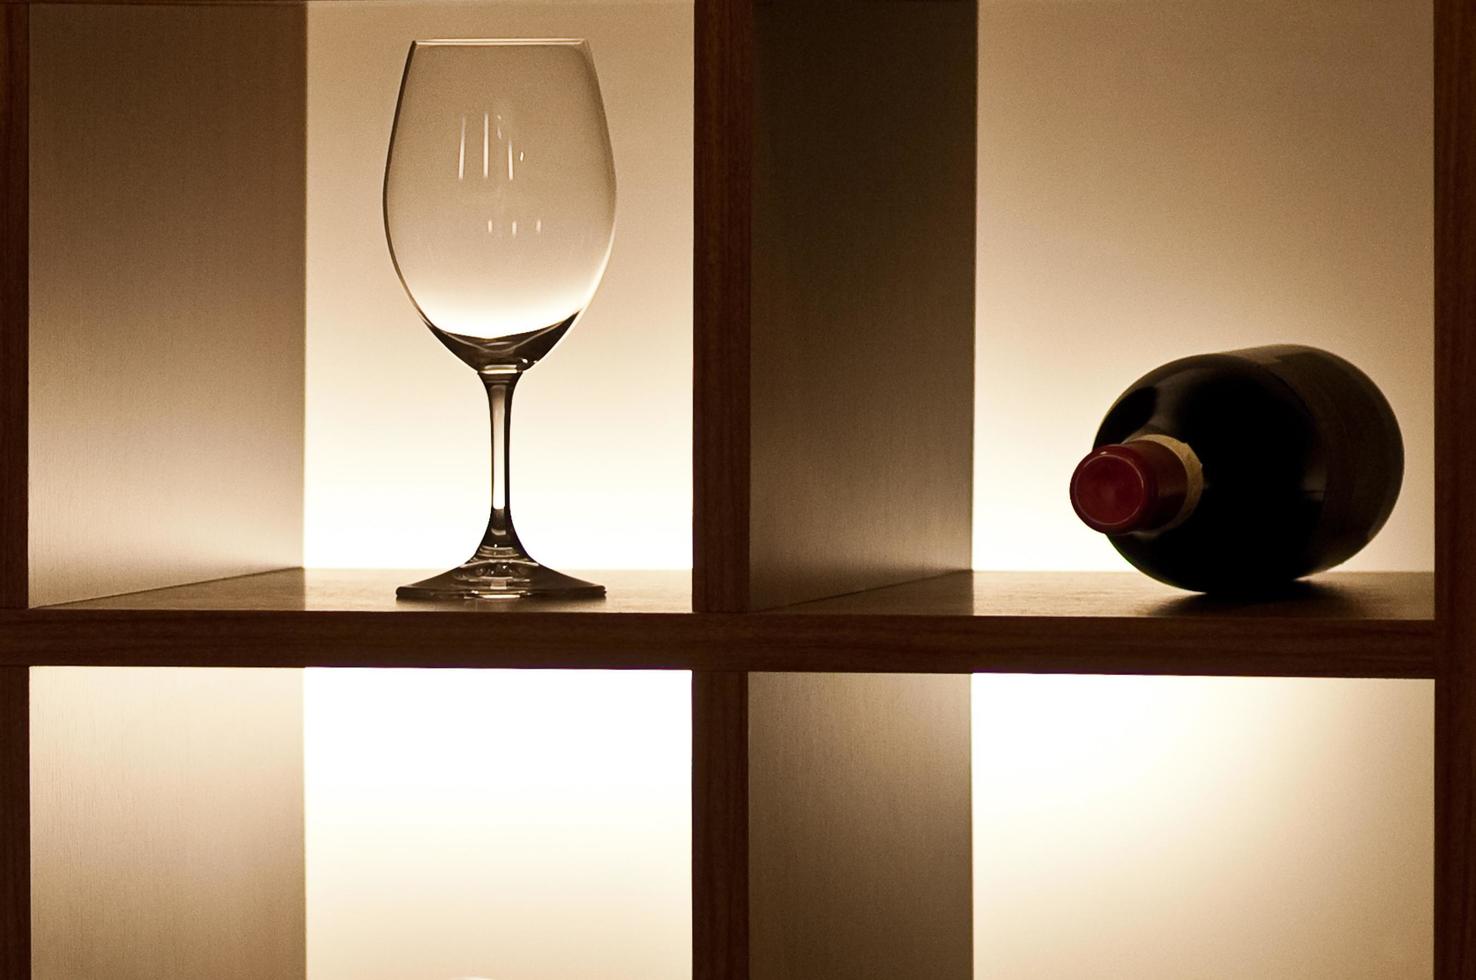 A single empty wine glass with beautiful reflections and a closed bottle of red wine lying on a shelf with side lighting set in the interior photo